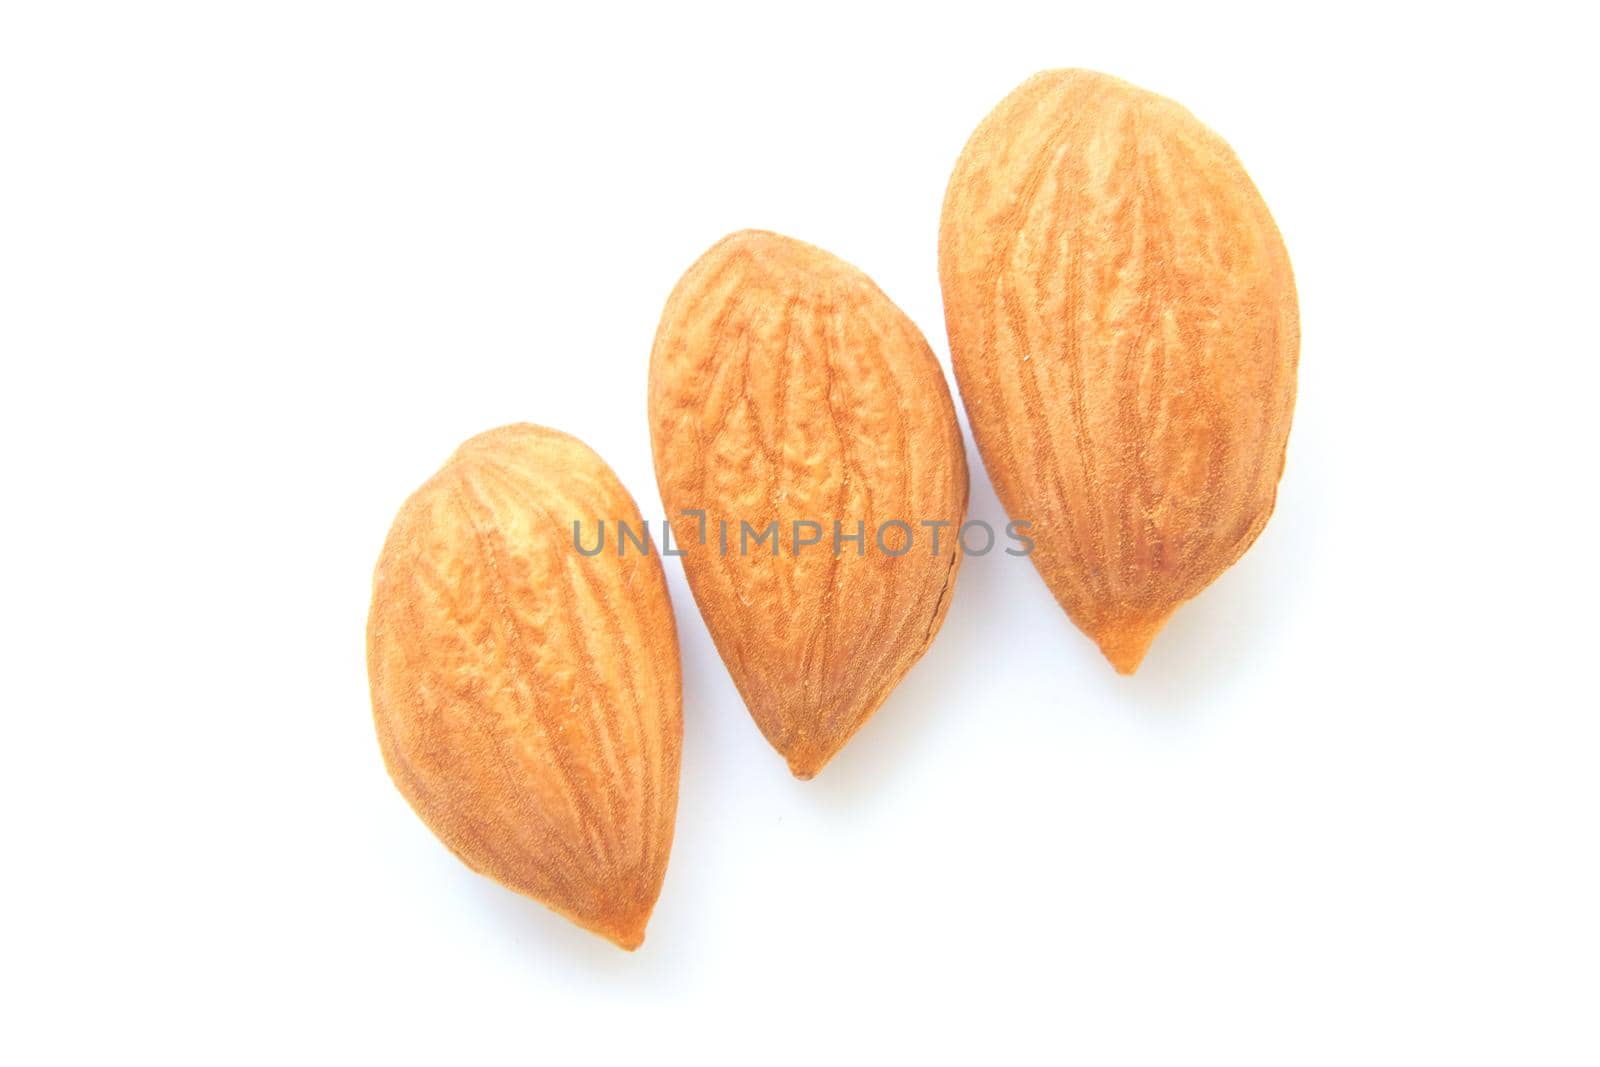 A softer, usually edible part of a nut, seed, or fruit stone contained within its hard shell. Ripe apricot kernels, taste of warm summer.